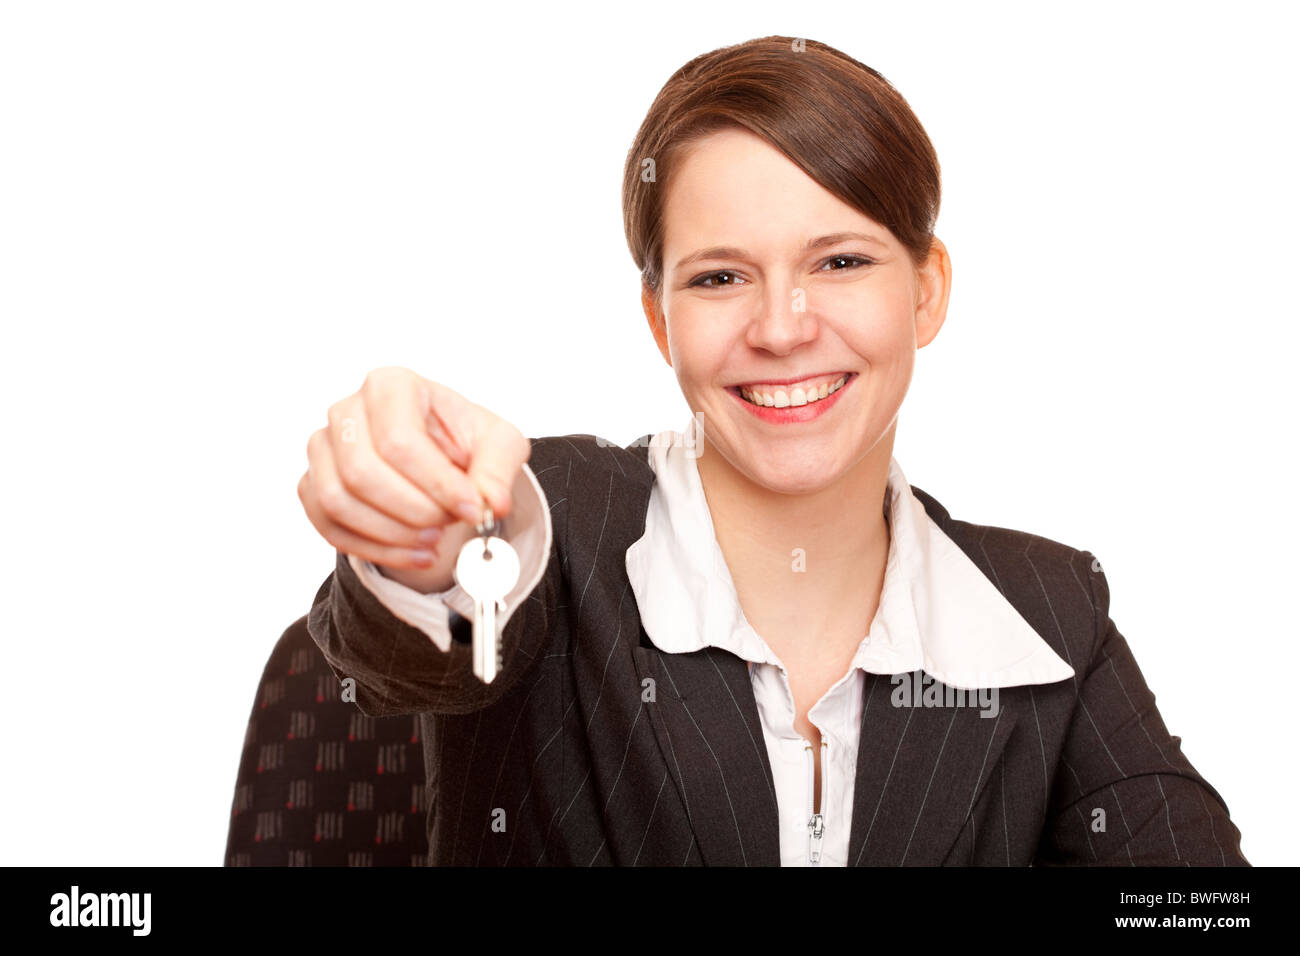 Smiling woman gives over house key. Isolated on white background Stock Photo